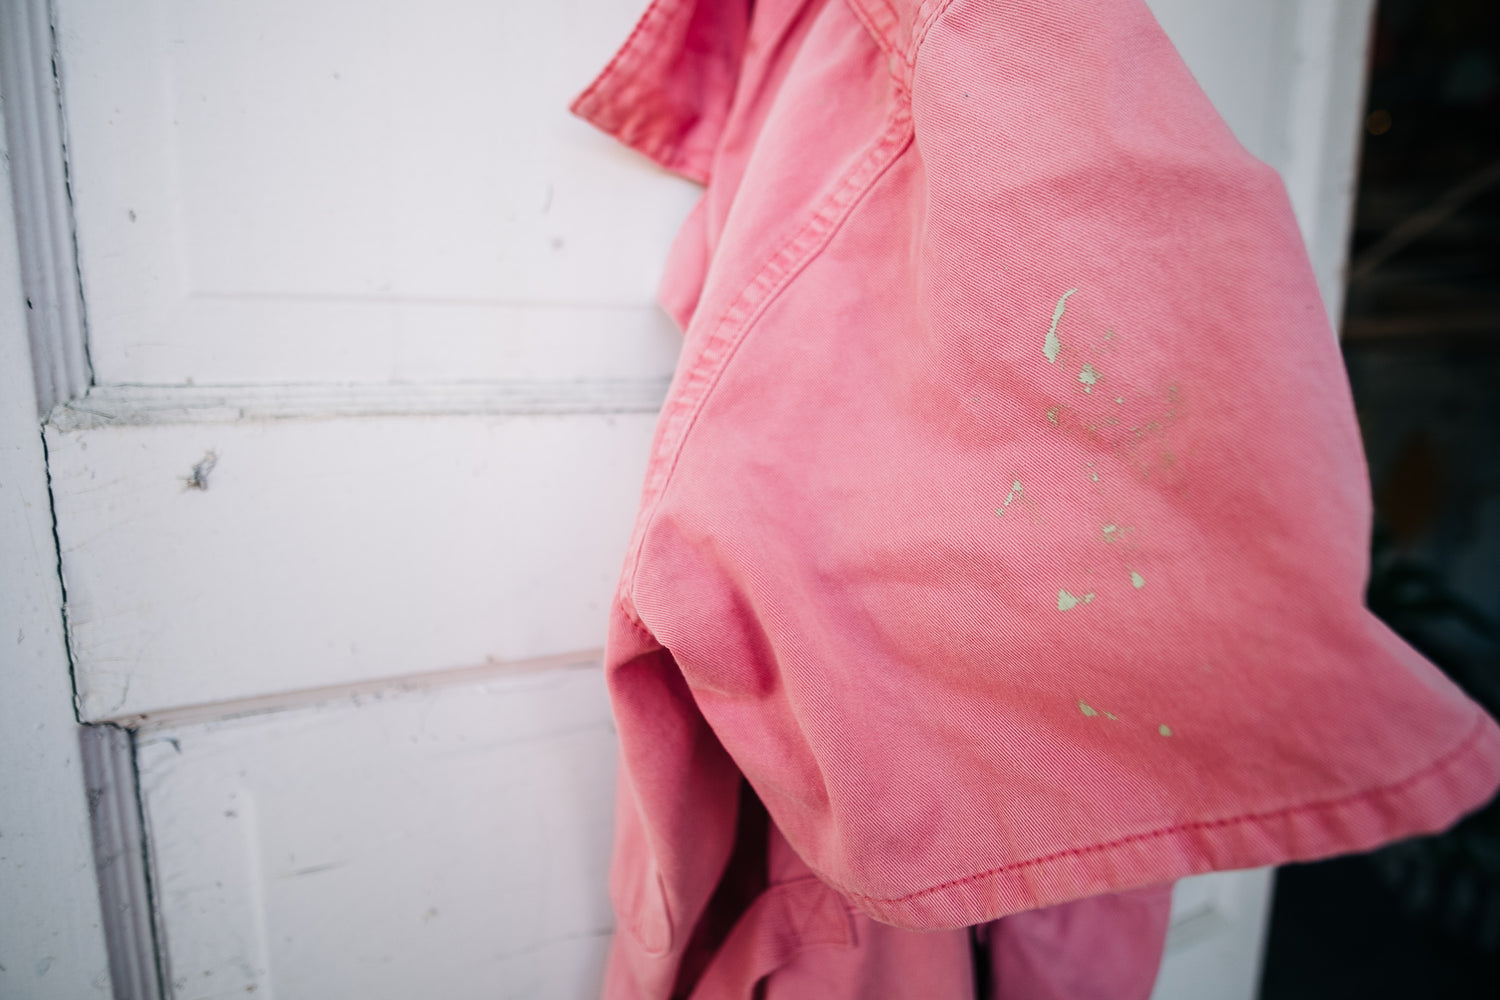 Pink coveralls with speckles of green paint hang on the back of the studio door